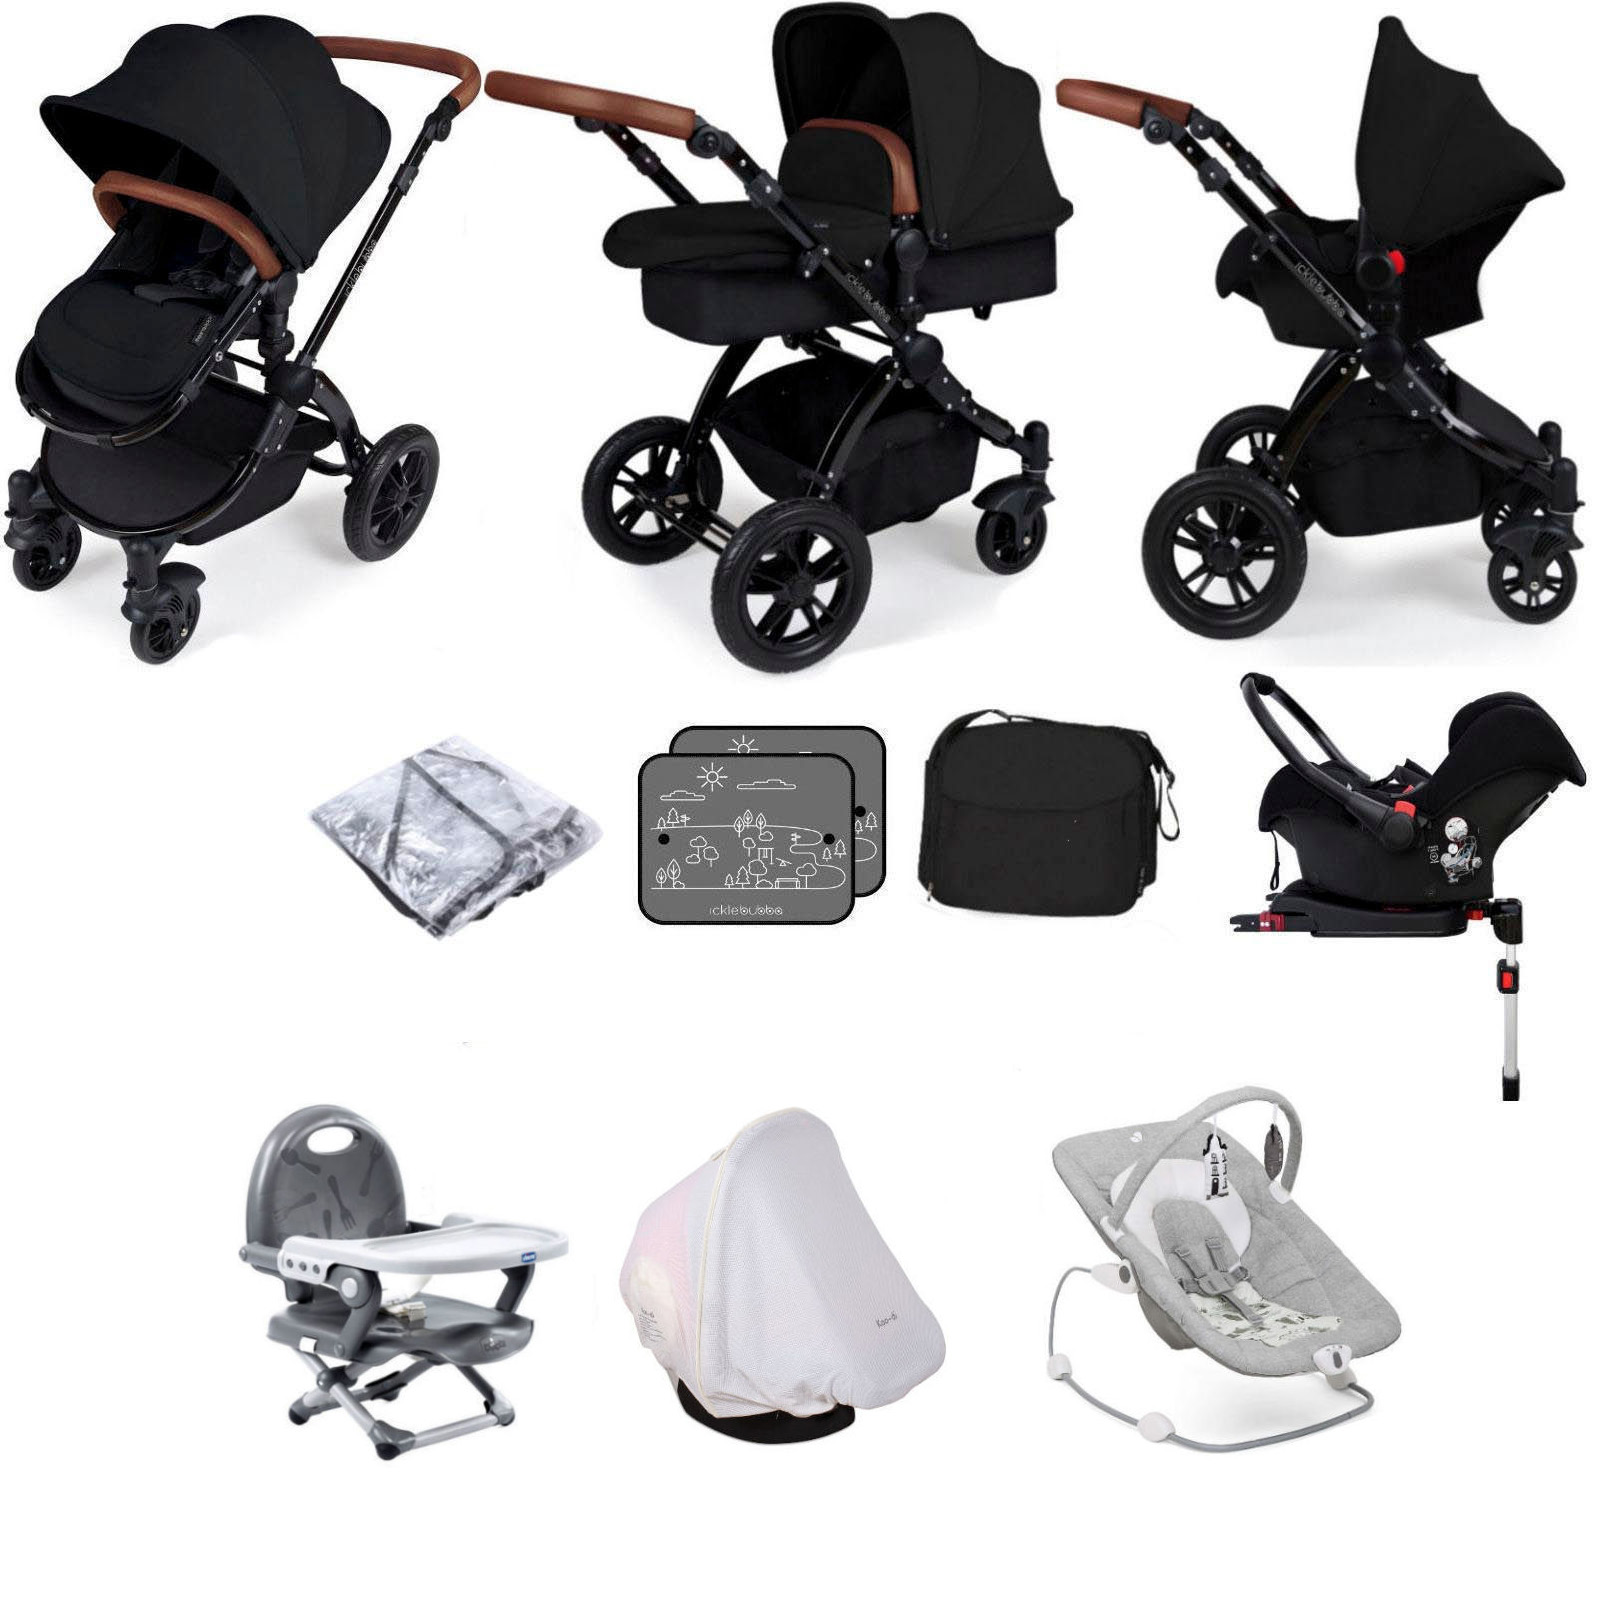 Ickle Bubba Stomp V3 11 Piece Black (Galaxy) Everything You Need Travel System Bundle (With Base) - Black